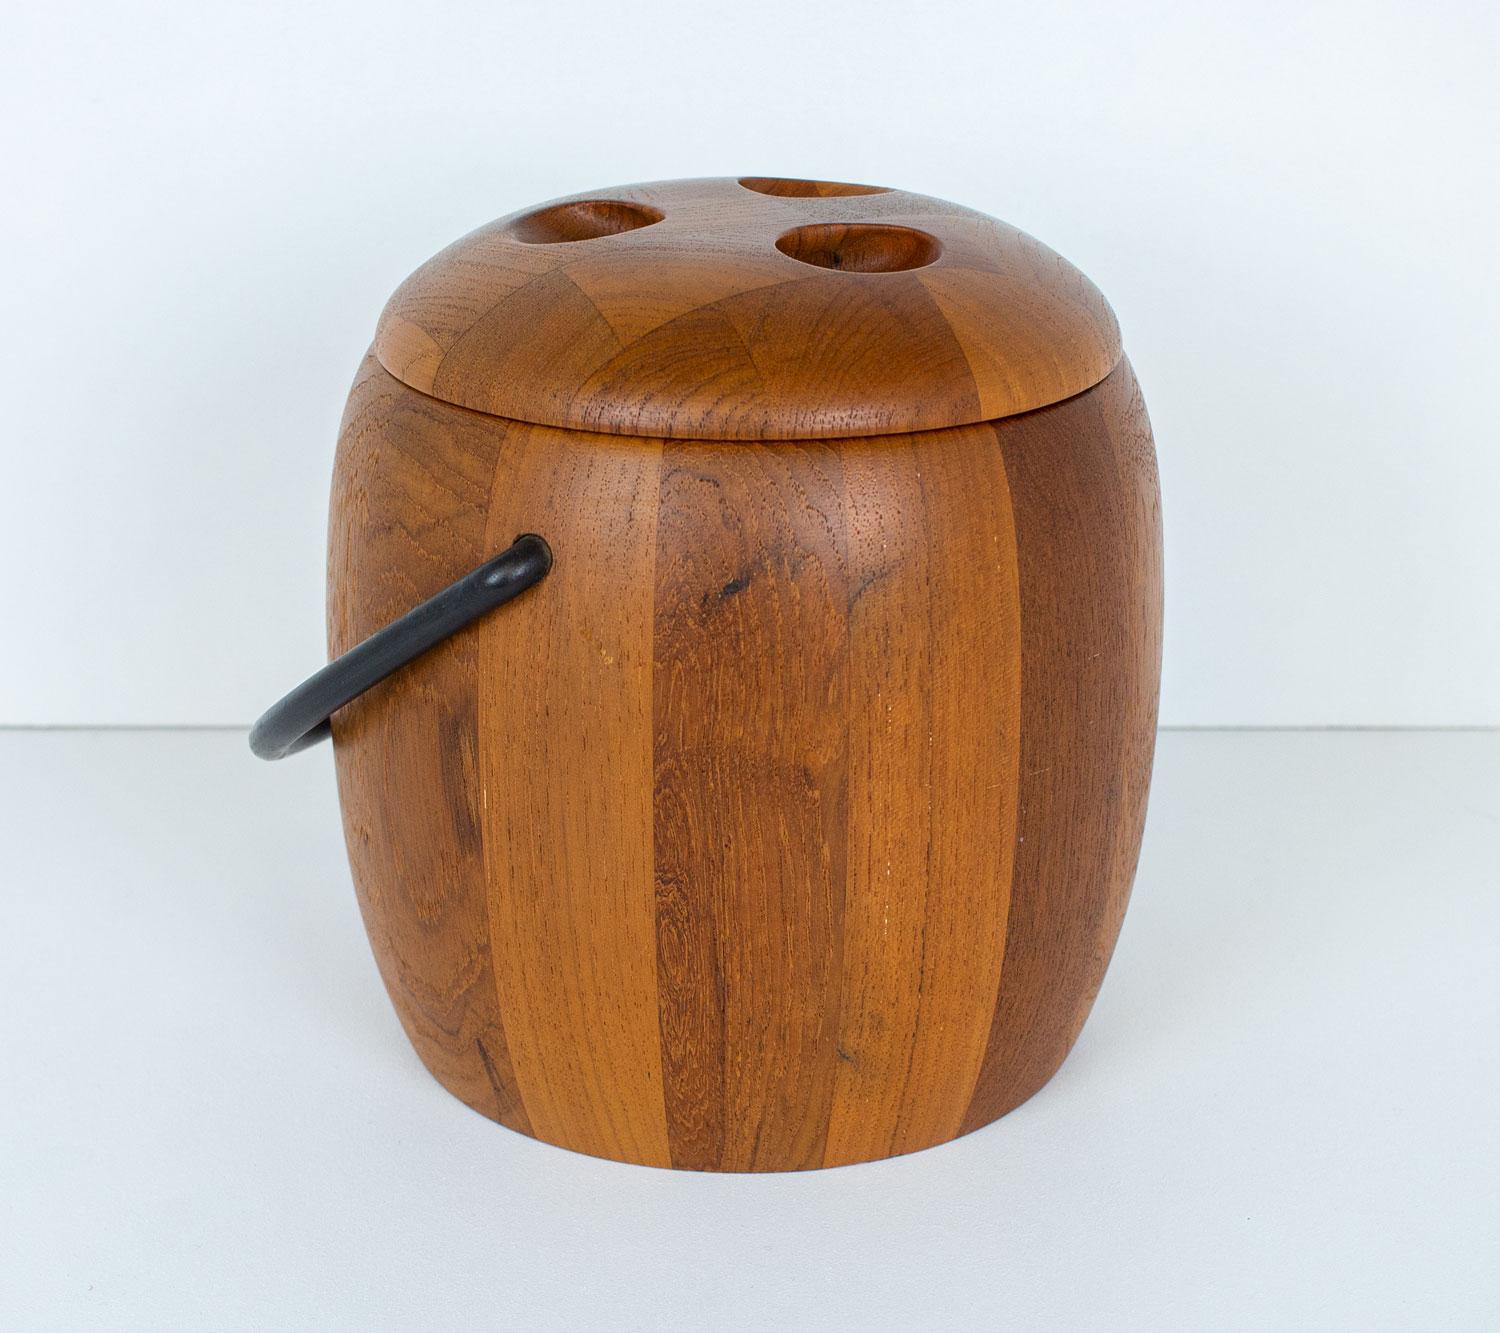 1960s Danish teak ice bucket by Digsmed, a small Danish company producing high quality homeware in the 1960s and 1970s. It is made of curved staved teak with a cast iron handle, distinctive bowling ball style handle and black plastic liner.